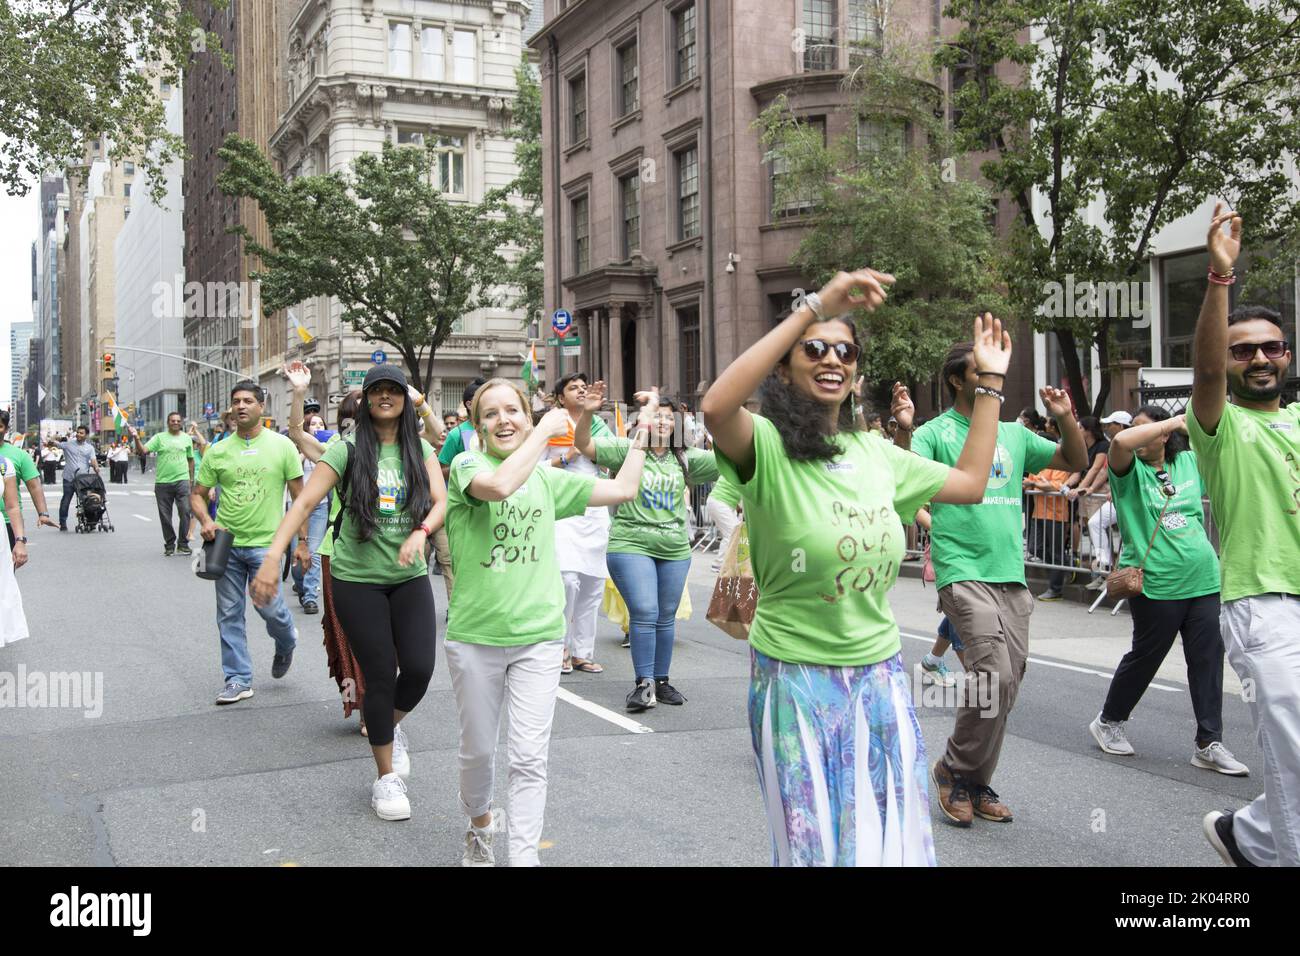 75th anniversary Indian Independence Day Parade on Madison Avenue in New York City. Members of Save Soil environmental movement dance in the pasrade.     Save Soil is a global movement launched by Sadhguru, to address the soil crisis by bringing together people from around the world to stand up for Soil Health, and supporting leaders of all nations to institute national policies and actions toward increasing the organic content in cultivable Soil. Stock Photo